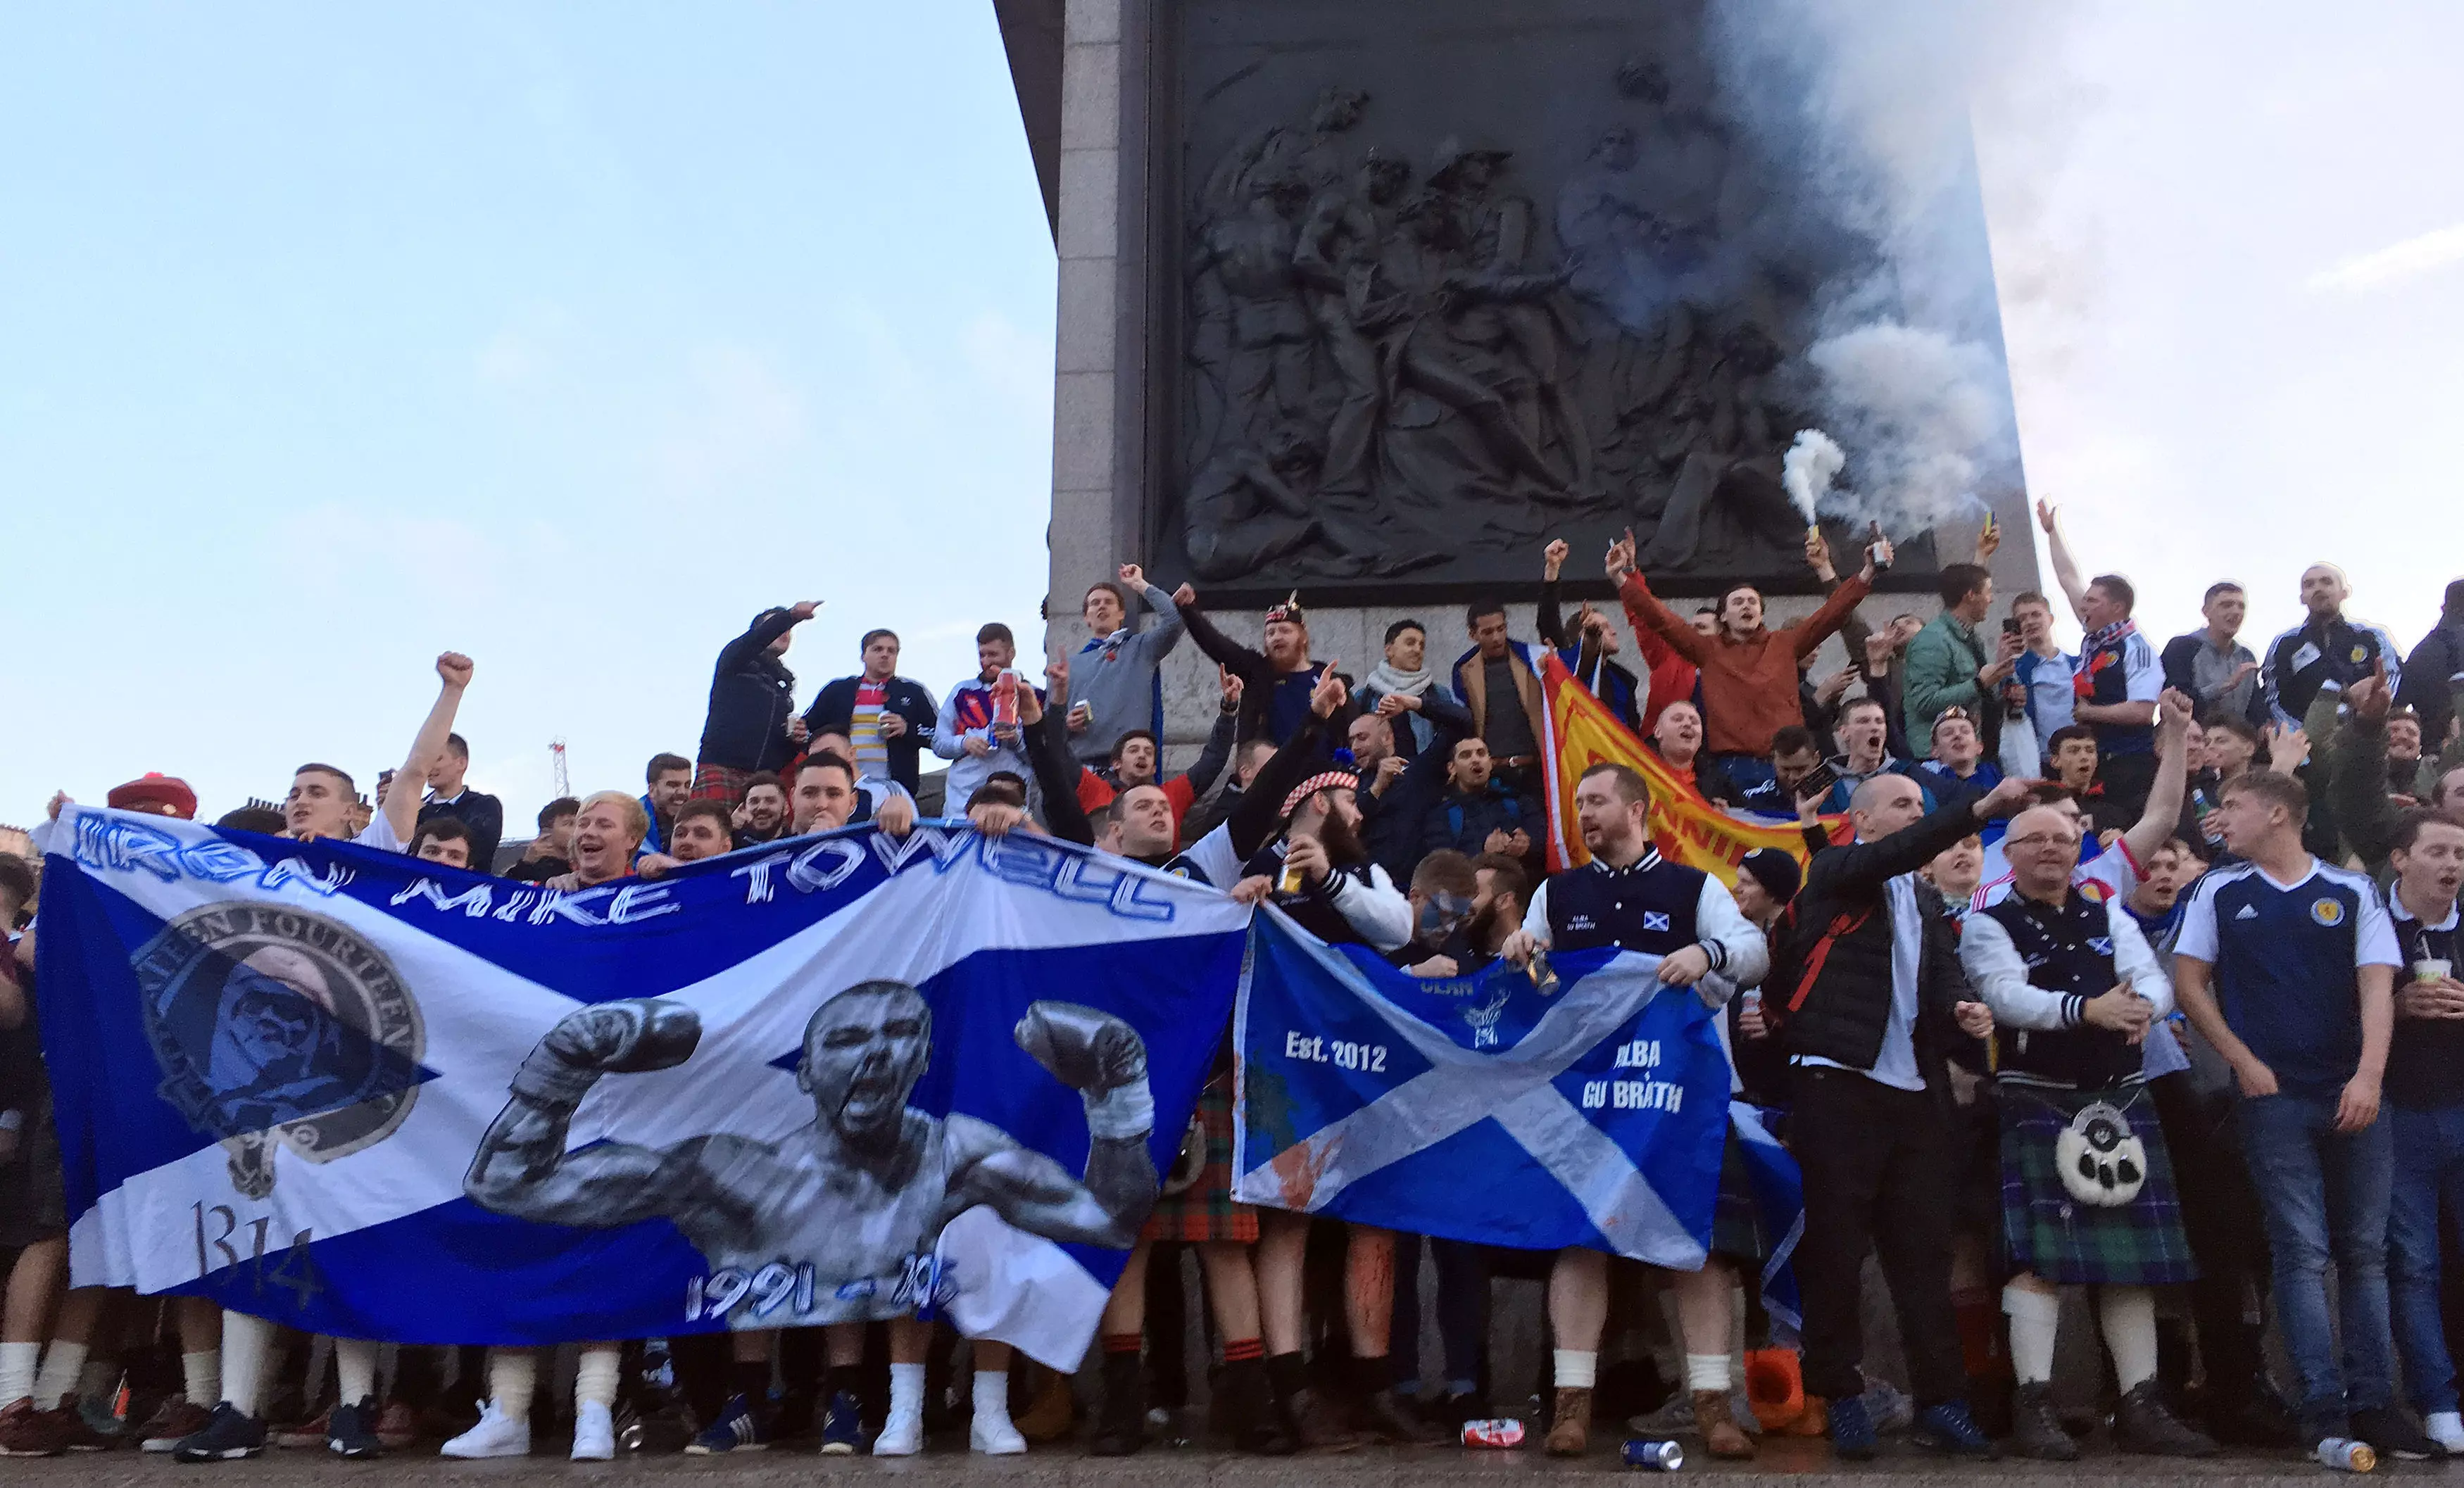 Scottish Football Fans Take Over Armistice Day Memorial In Central London